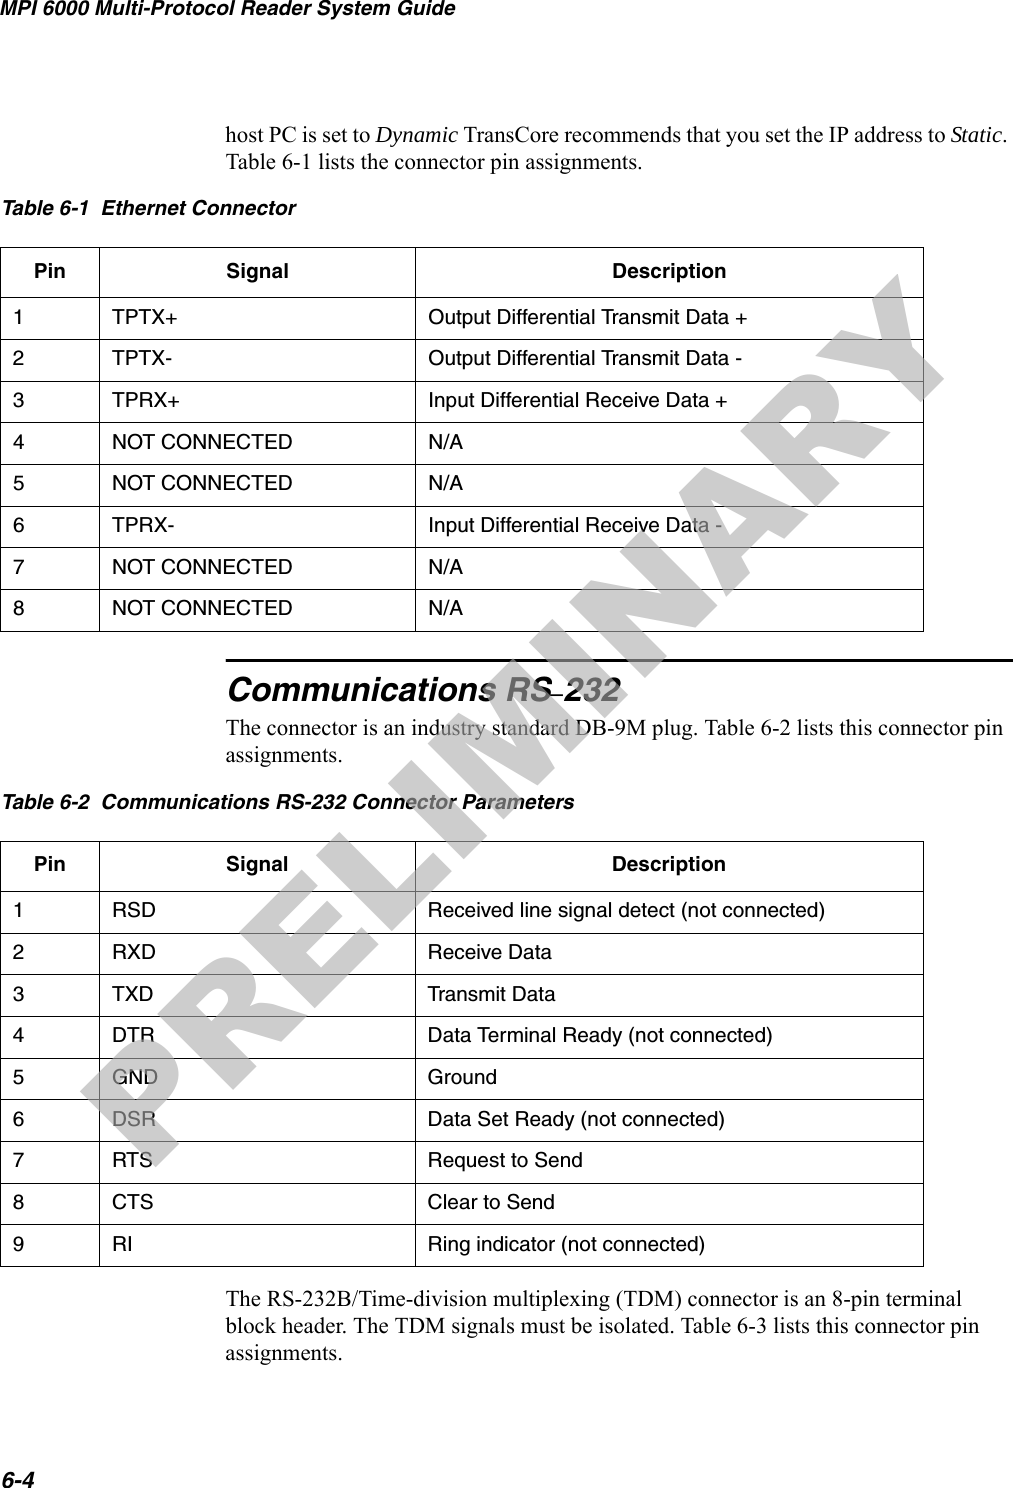 MPI 6000 Multi-Protocol Reader System Guide6-4host PC is set to Dynamic TransCore recommends that you set the IP address to Static. Table 6-1 lists the connector pin assignments.Communications RS–232The connector is an industry standard DB-9M plug. Table 6-2 lists this connector pin assignments.The RS-232B/Time-division multiplexing (TDM) connector is an 8-pin terminal block header. The TDM signals must be isolated. Table 6-3 lists this connector pin assignments.Table 6-1  Ethernet ConnectorPin Signal Description1TPTX+ Output Differential Transmit Data +2TPTX- Output Differential Transmit Data -3  TPRX+ Input Differential Receive Data +4NOT CONNECTED N/A5NOT CONNECTED N/A6TPRX- Input Differential Receive Data -7NOT CONNECTED N/A8NOT CONNECTED N/ATable 6-2  Communications RS-232 Connector ParametersPin Signal Description1RSD Received line signal detect (not connected)2RXD Receive Data3TXD Transmit Data4DTR Data Terminal Ready (not connected)5GND Ground6DSR Data Set Ready (not connected)7RTS Request to Send8CTS Clear to Send9RI Ring indicator (not connected)PRELIMINARY